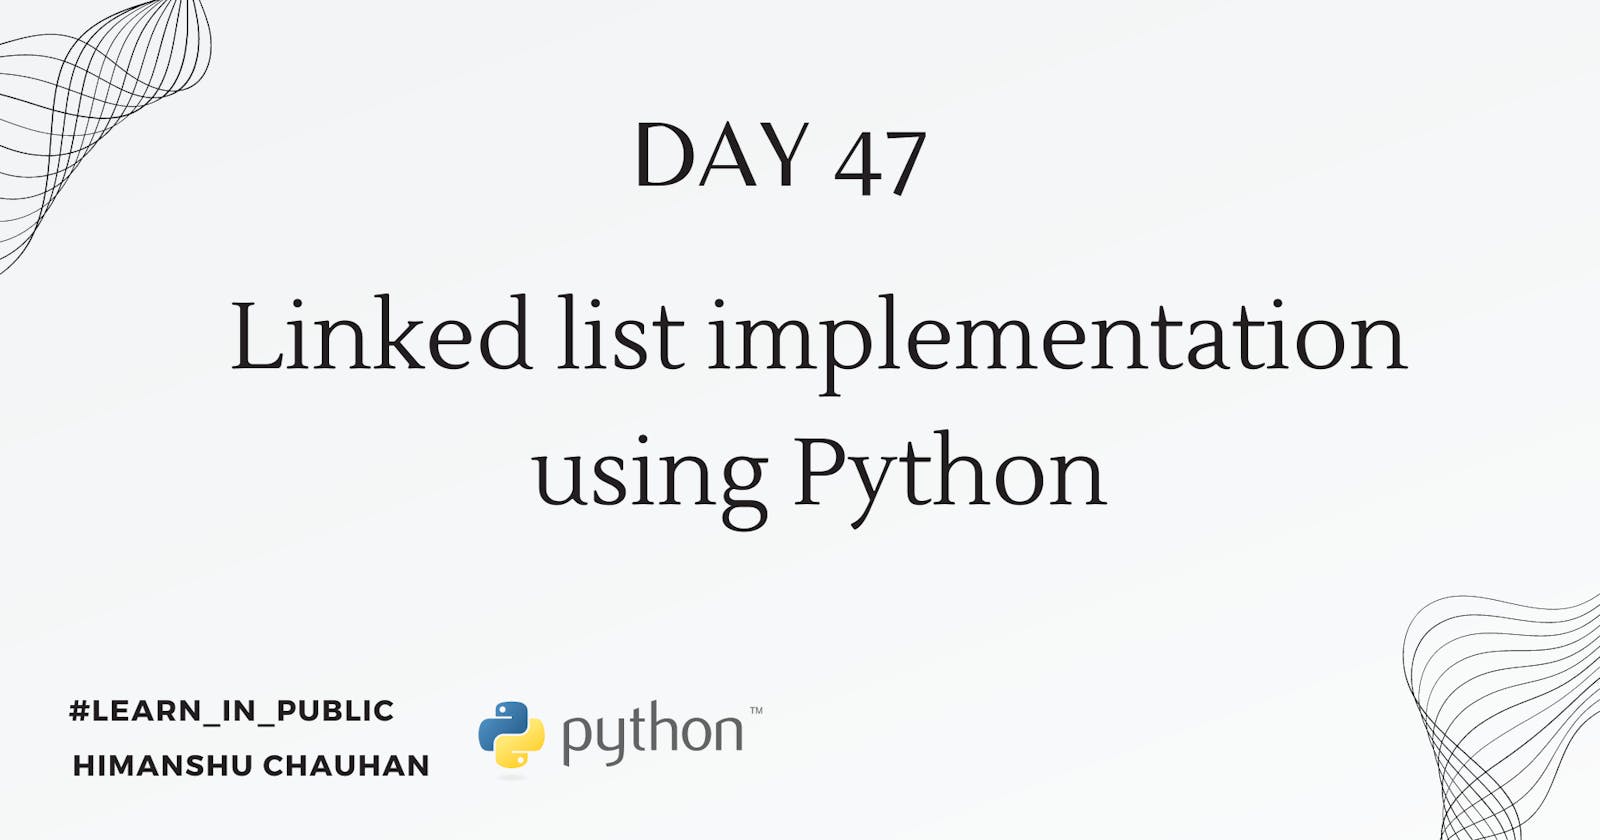 Day 48: Linked list implementation with Python